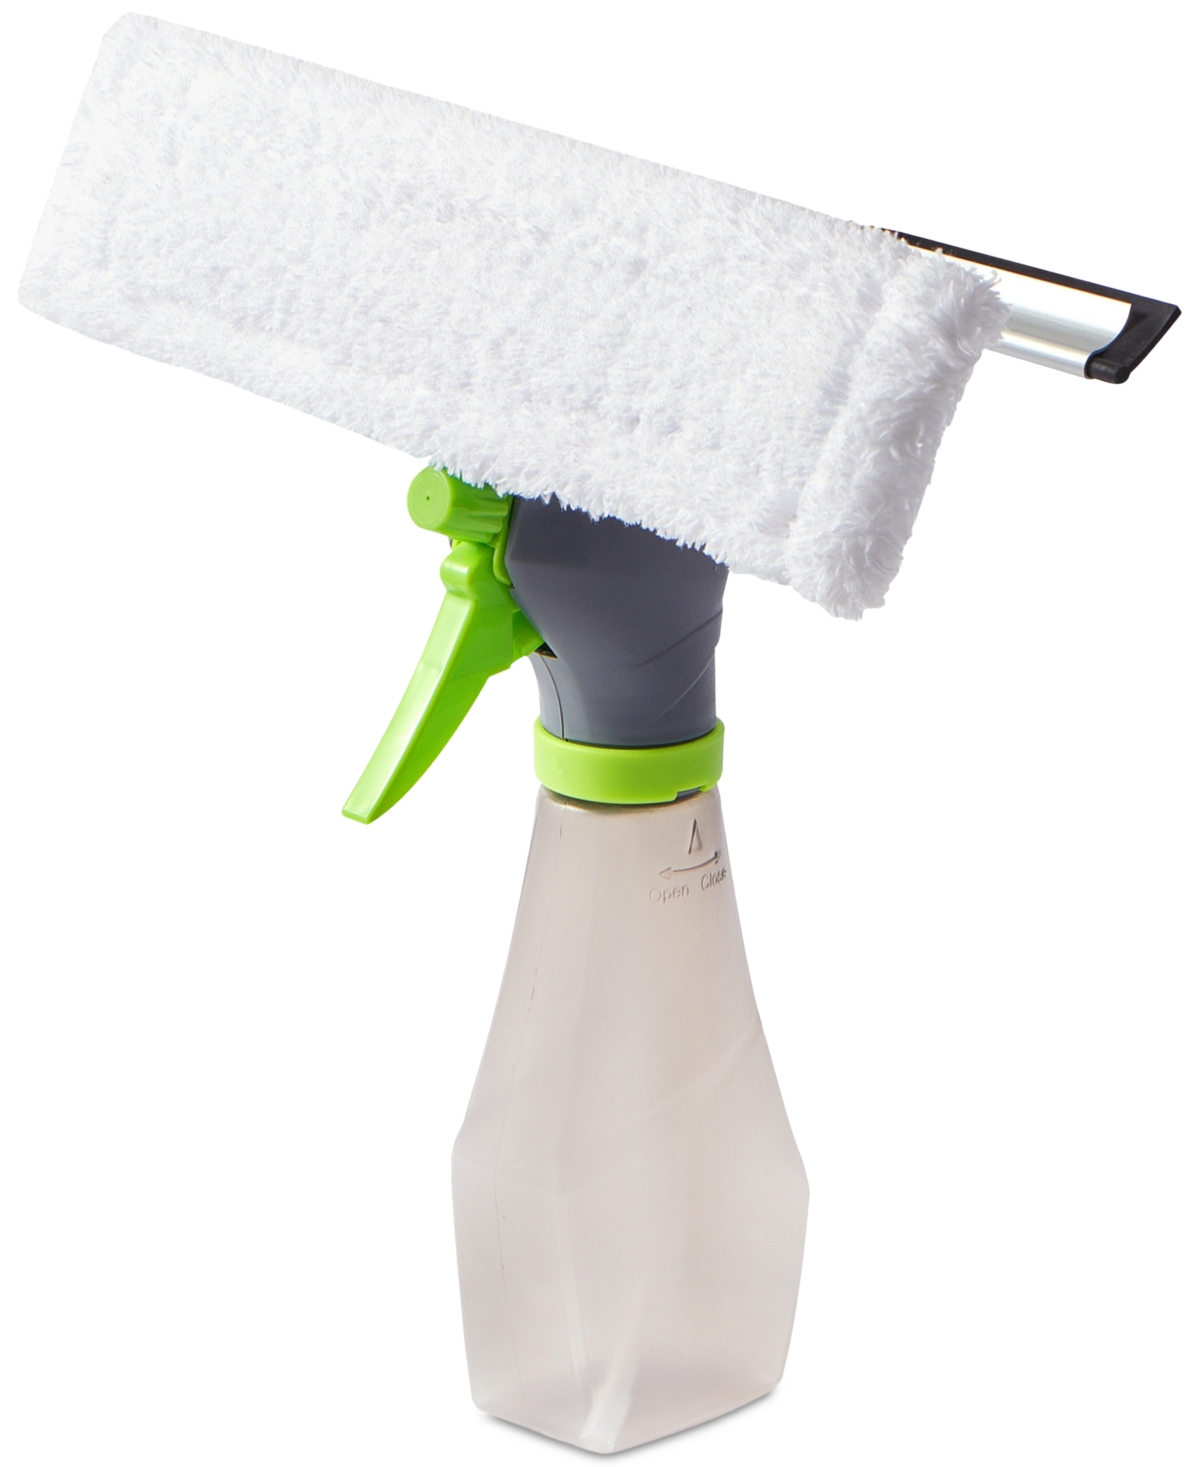 True & Tidy Glass Cleaner Spray Bottle With Built-in Squeegee In Lime